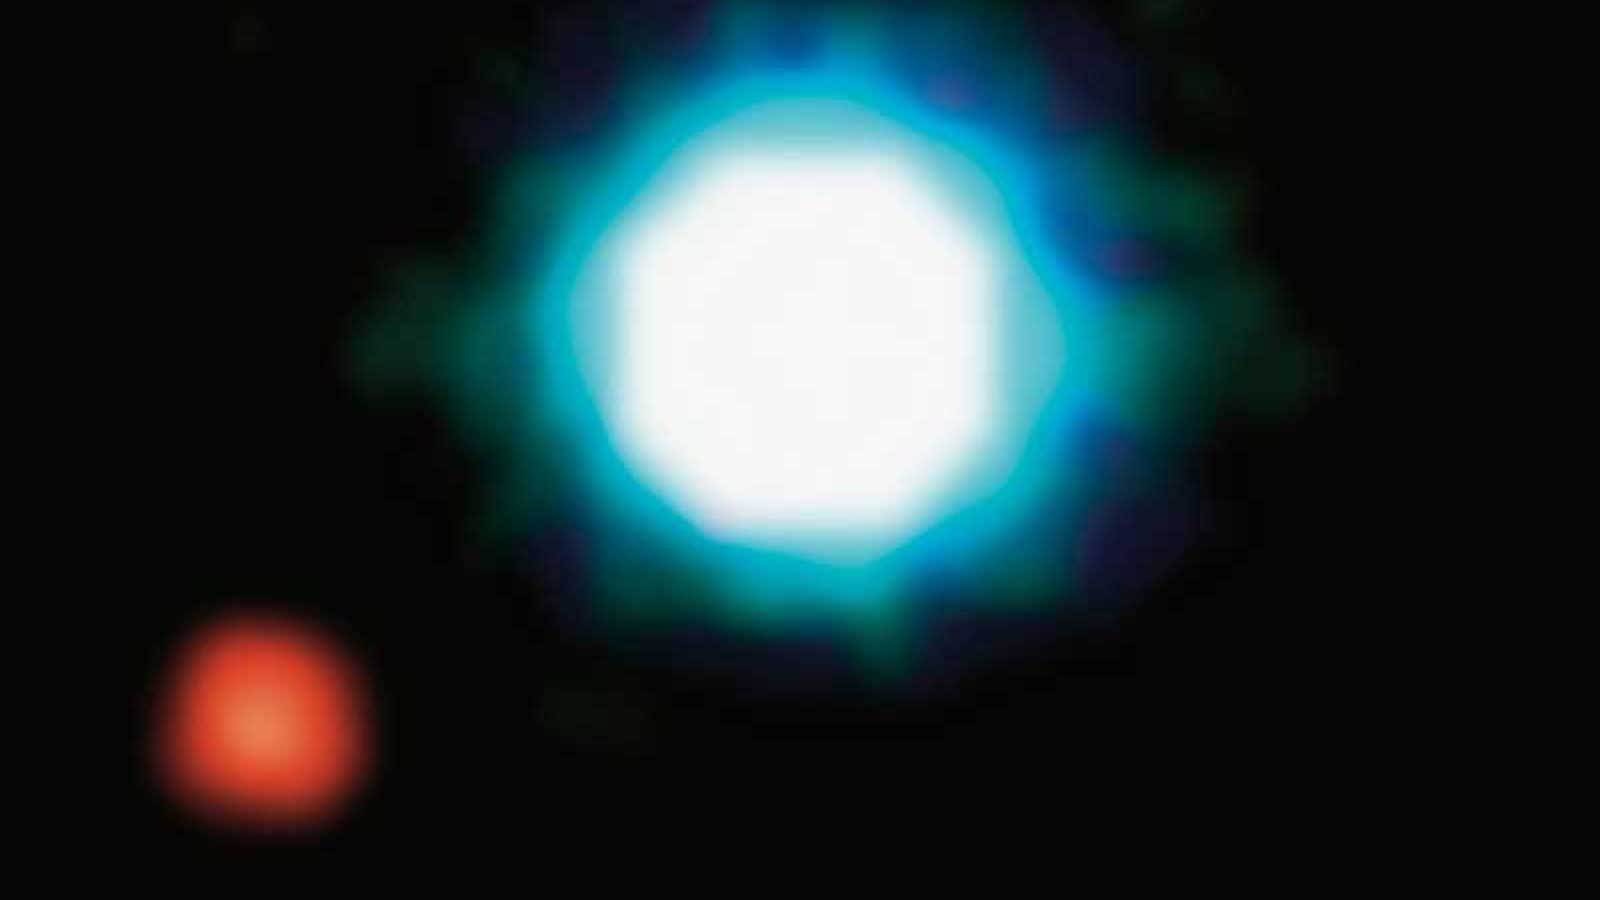 slide 5 - A large, bright star is seen with a smaller red exoplanet.